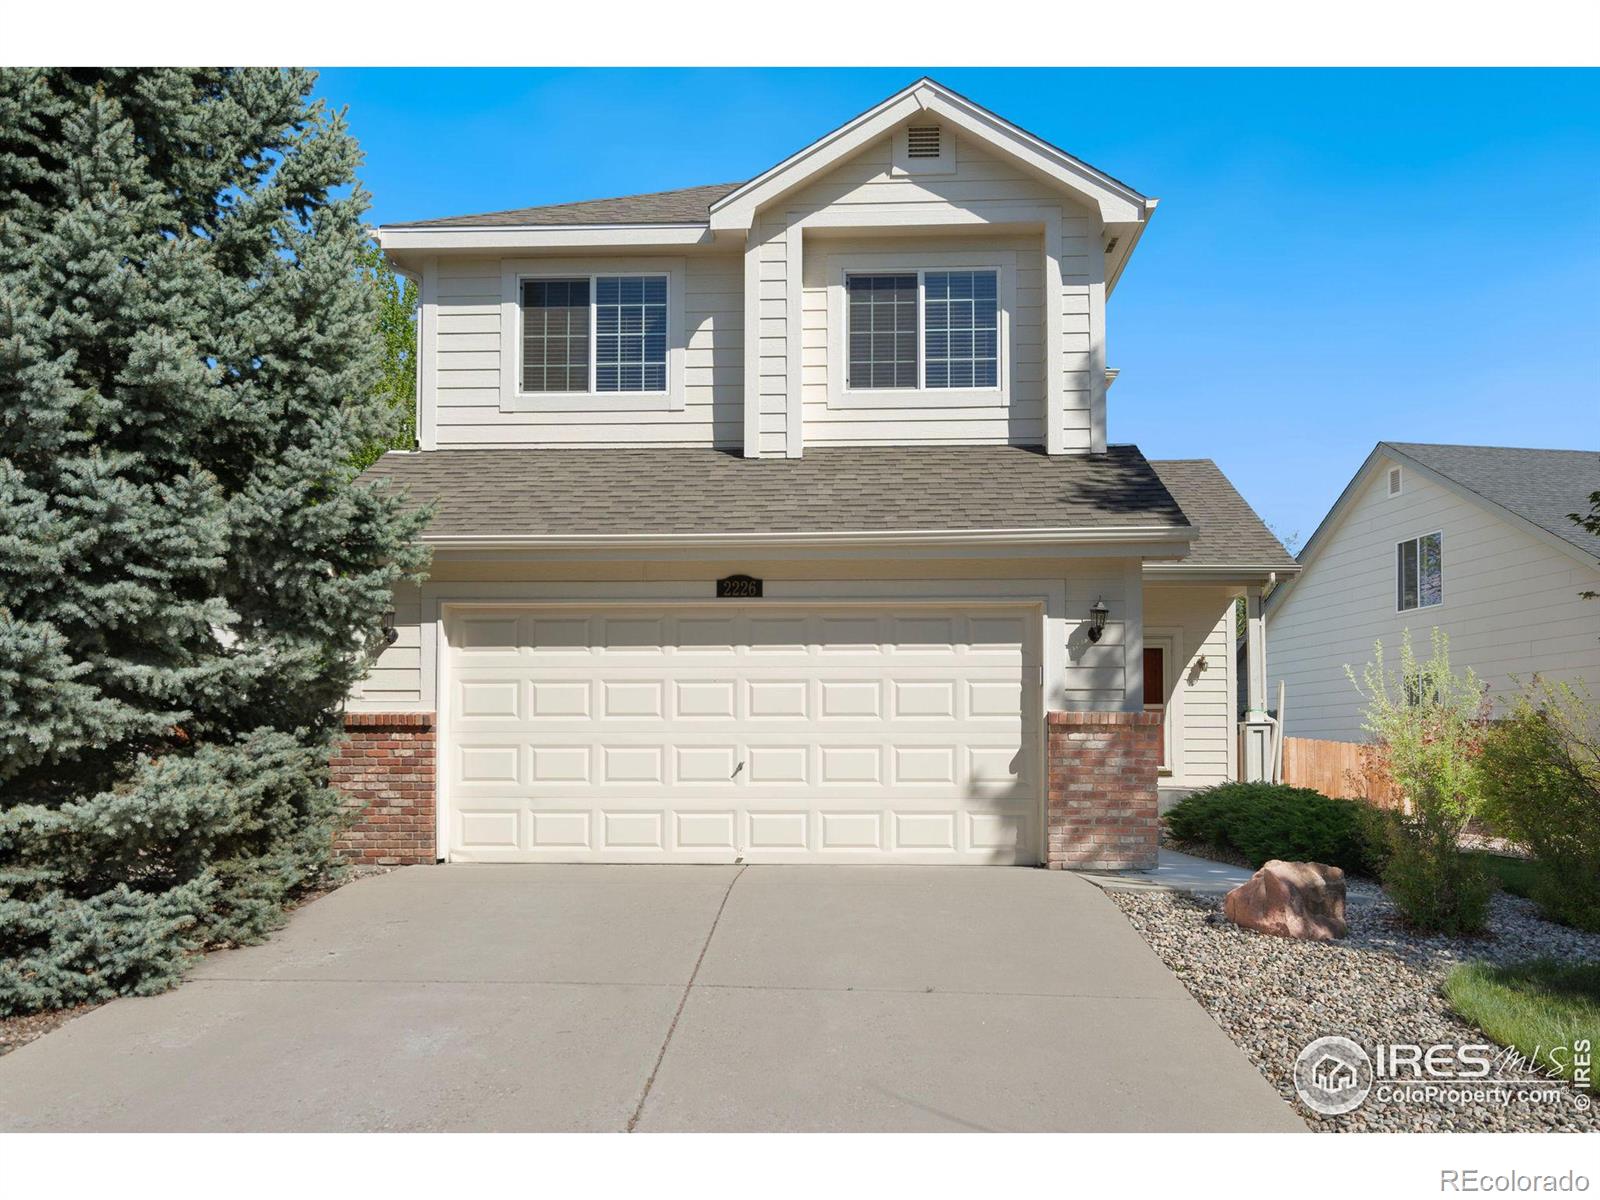 Report Image for 2226  Merlot Court,Fort Collins, Colorado